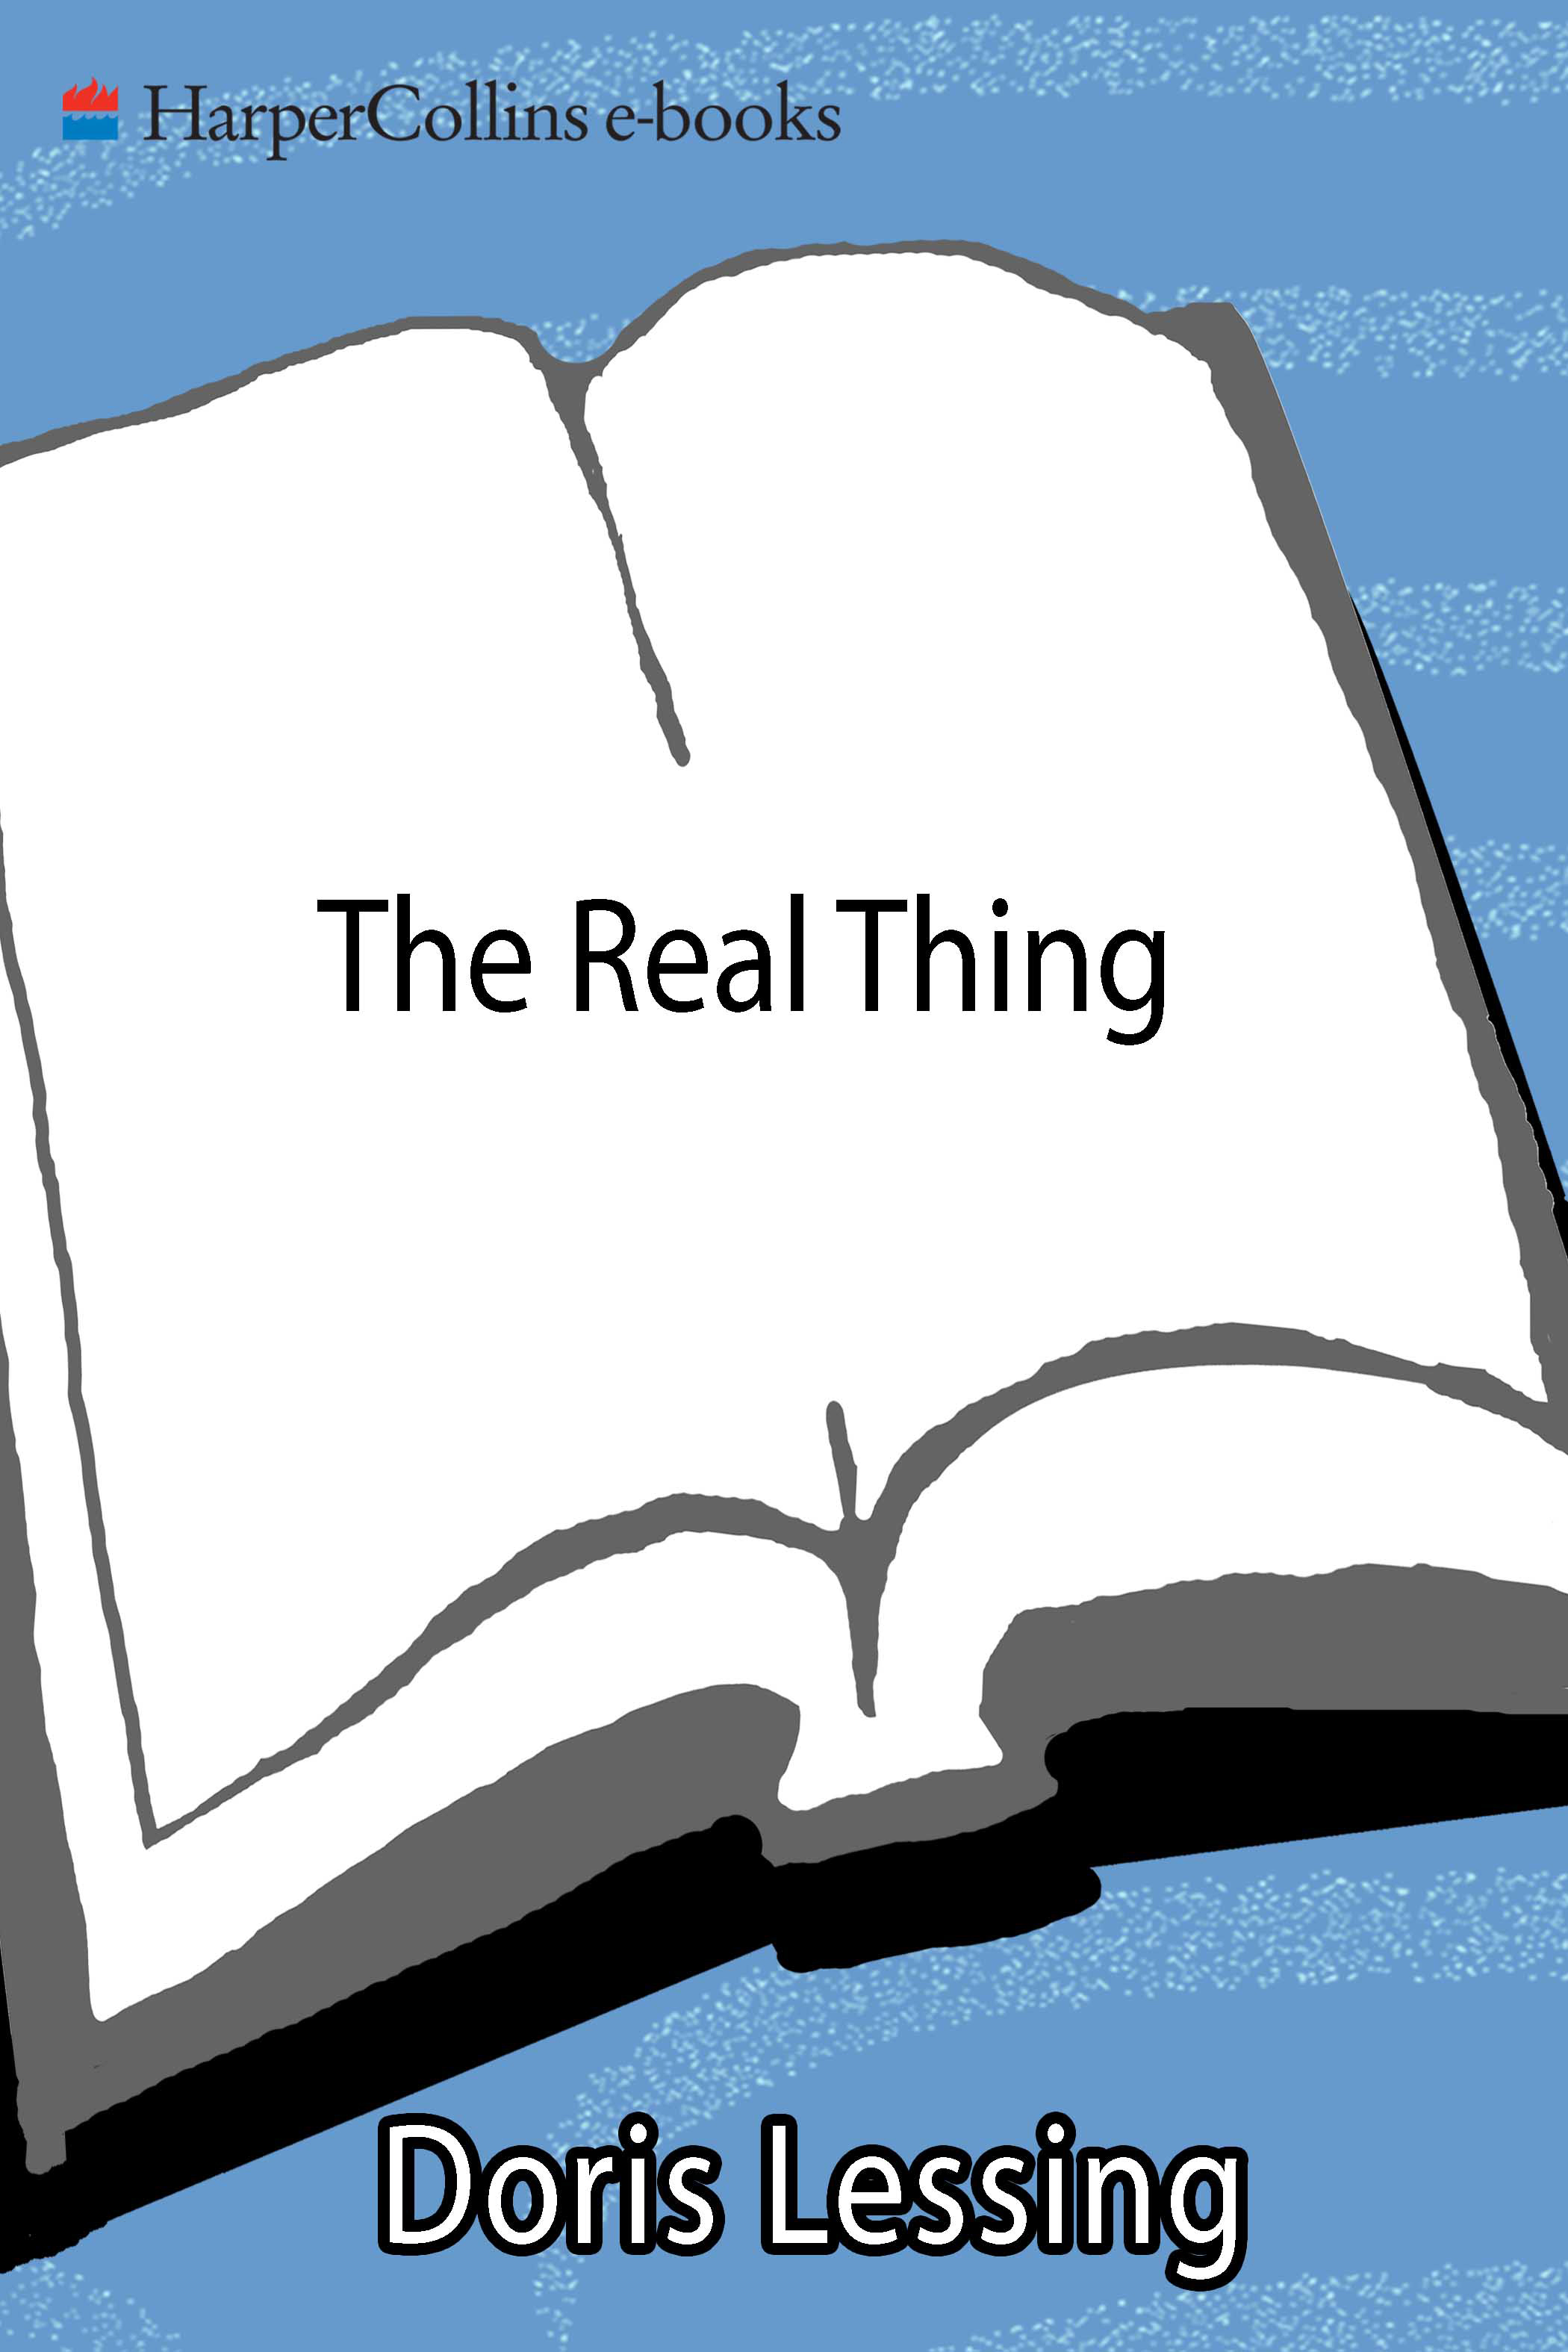 The Real Thing (1992) by Doris Lessing